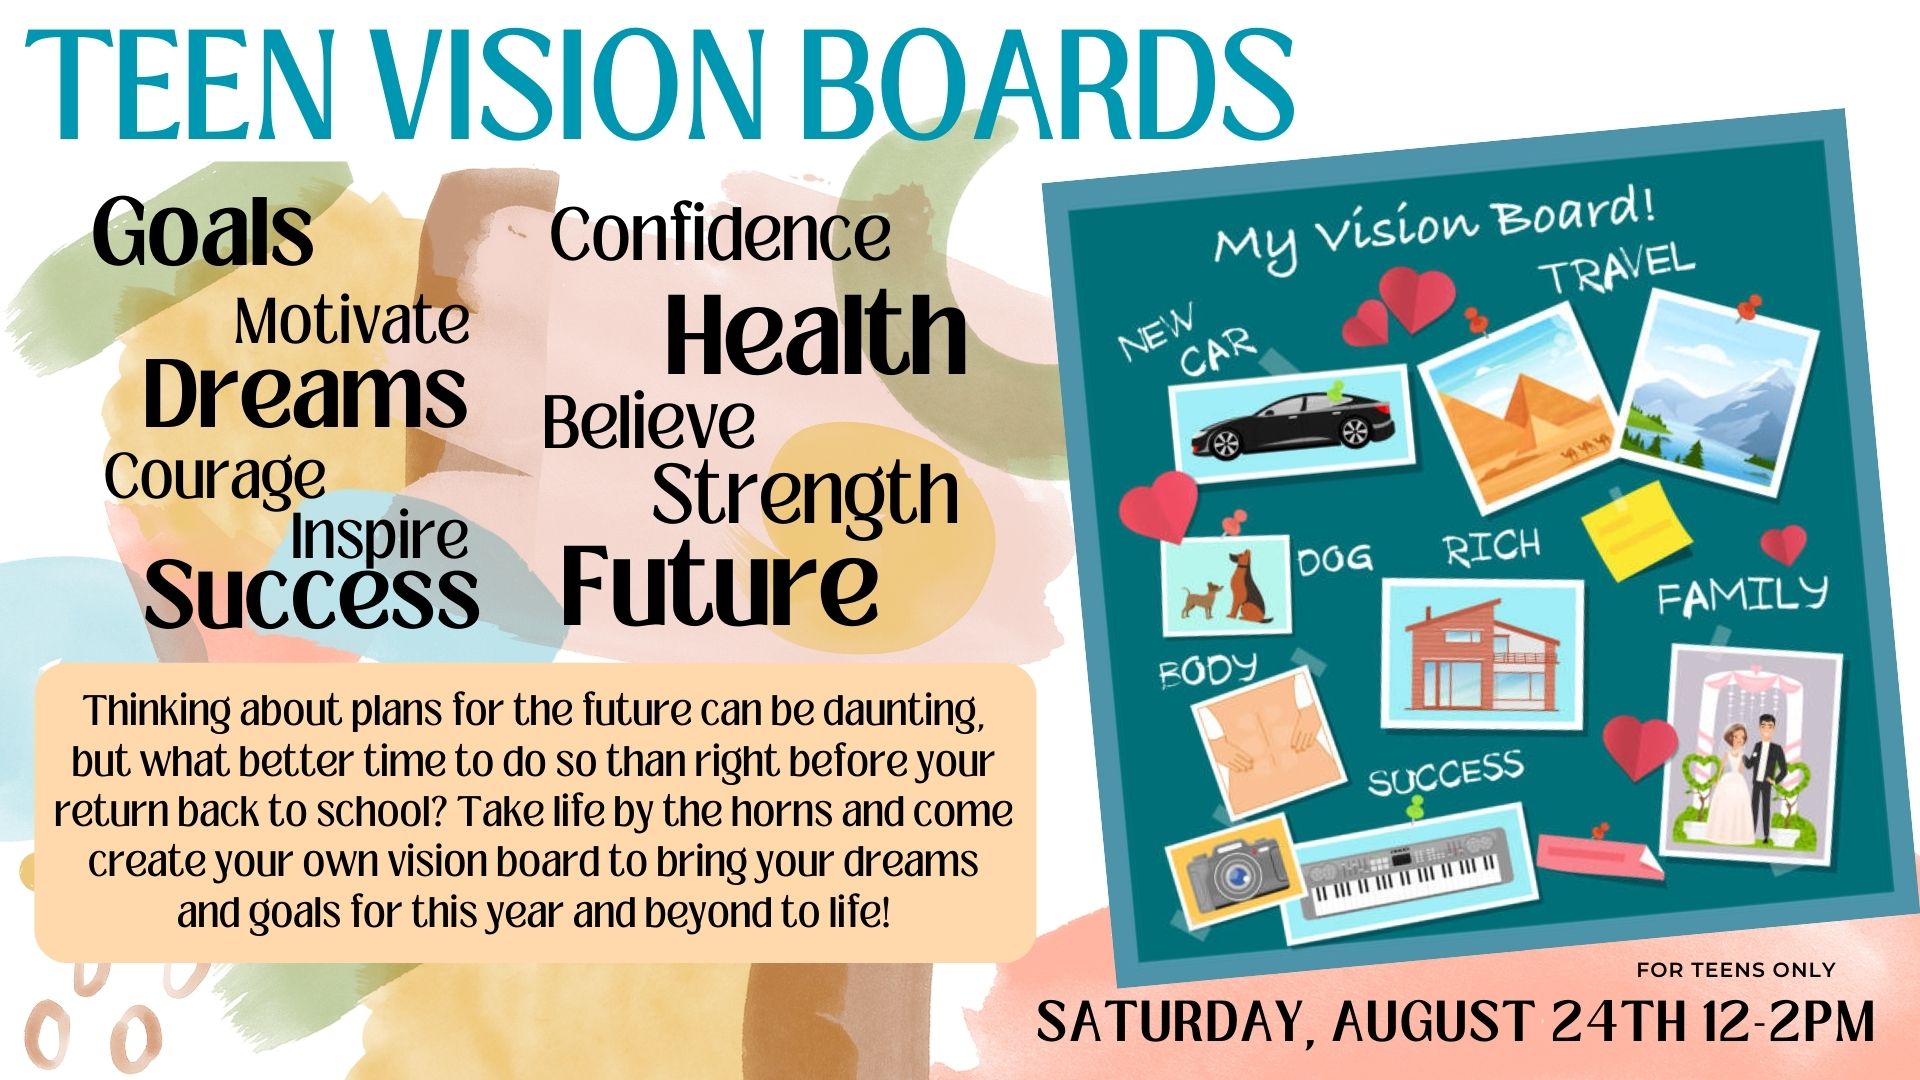 Teen Vision Boards